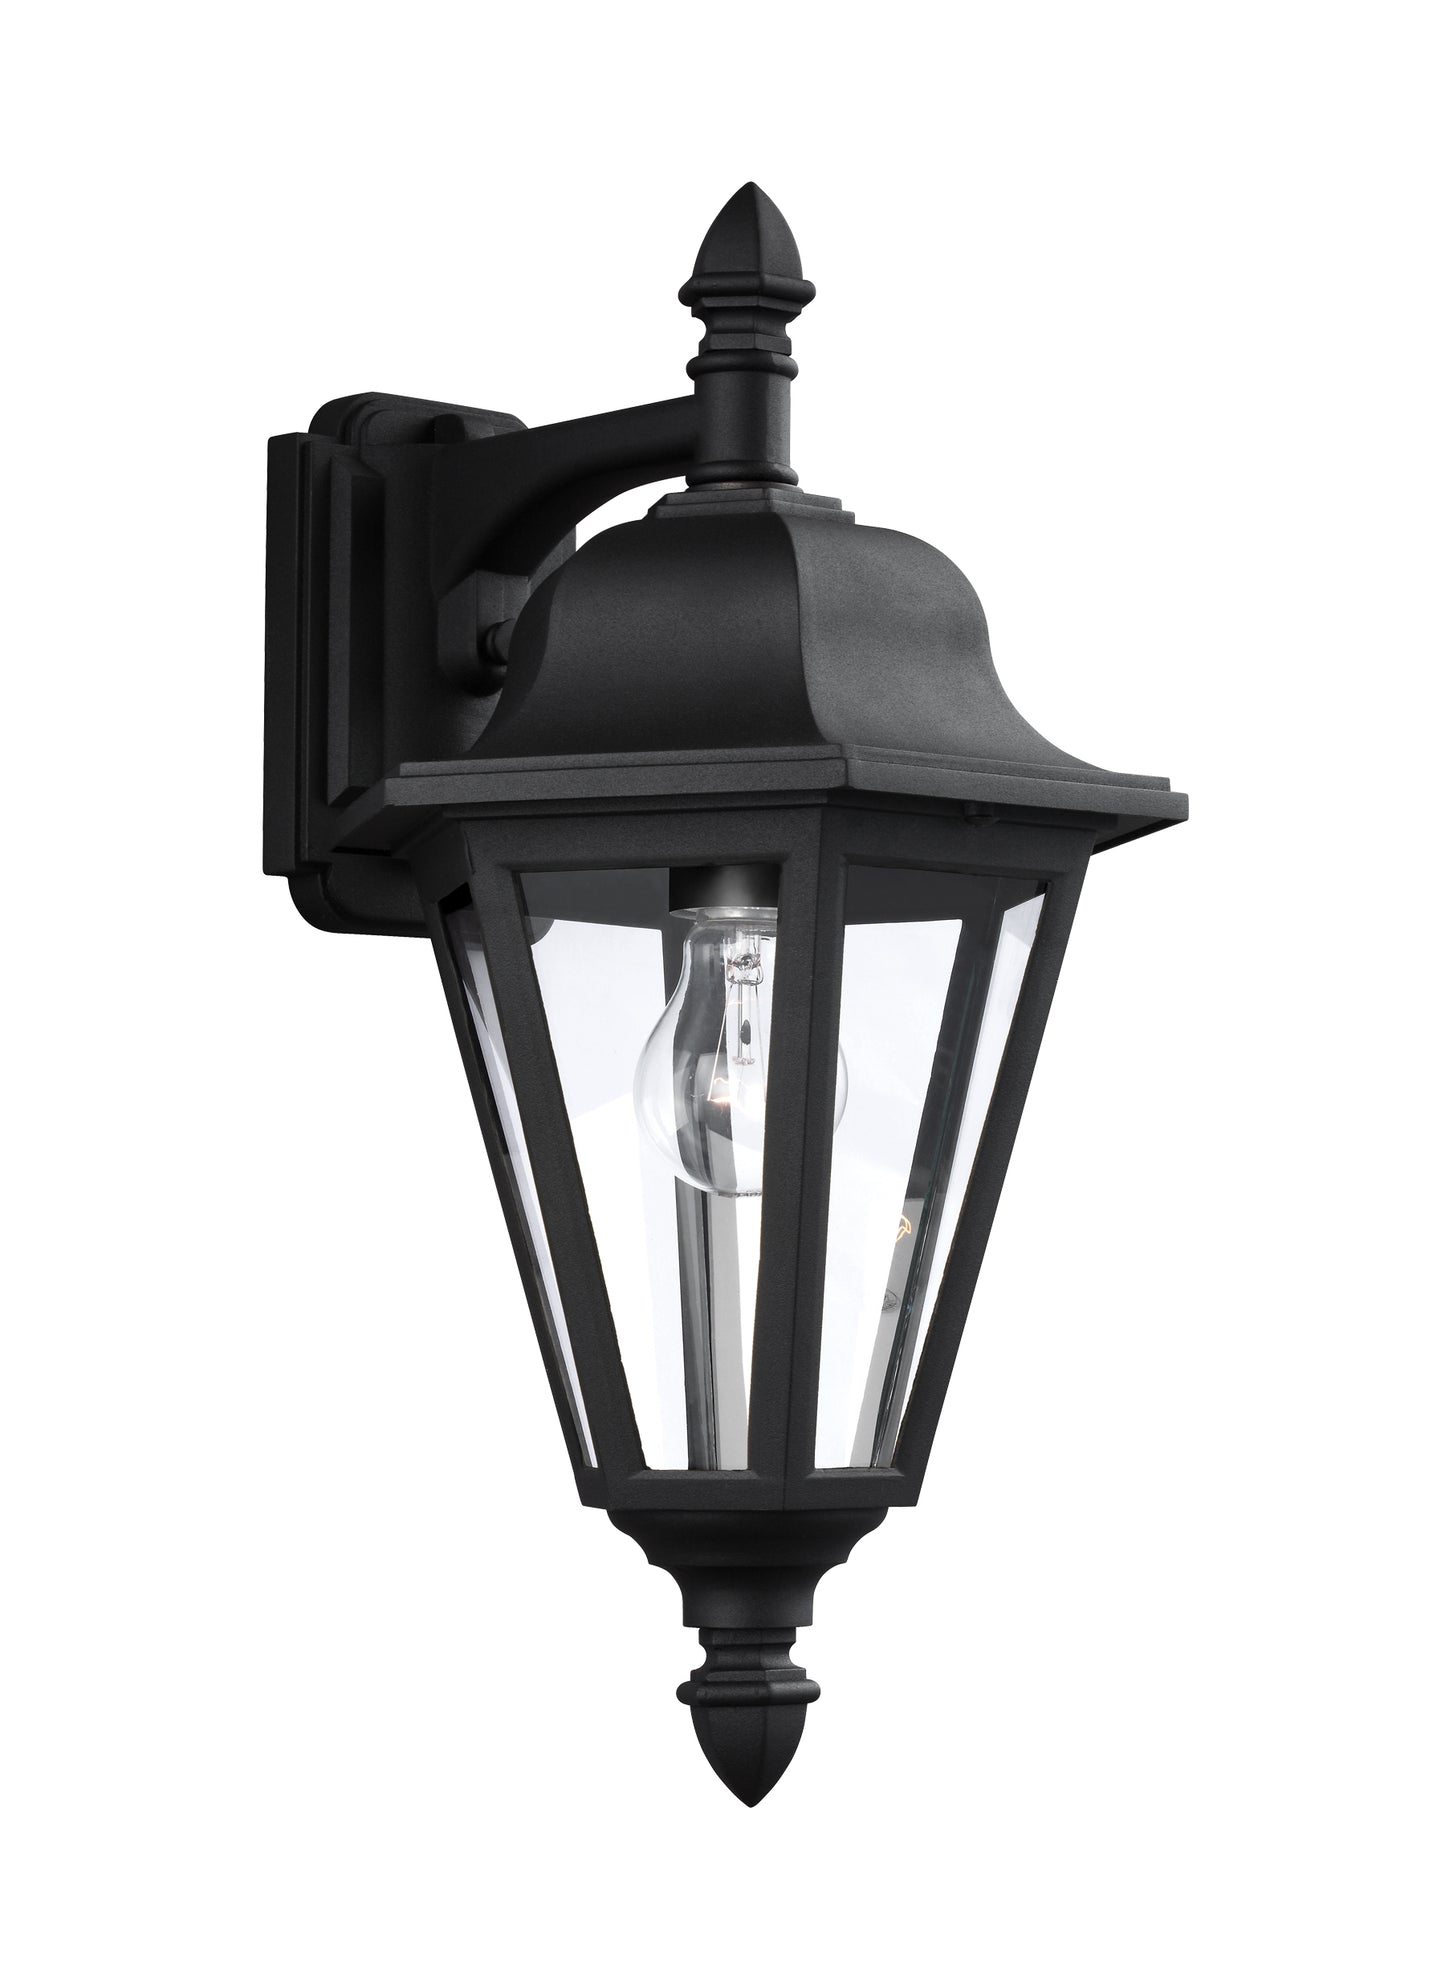 Brentwood traditional 1-light outdoor exterior downlight wall lantern sconce in black finish with clear glass panels